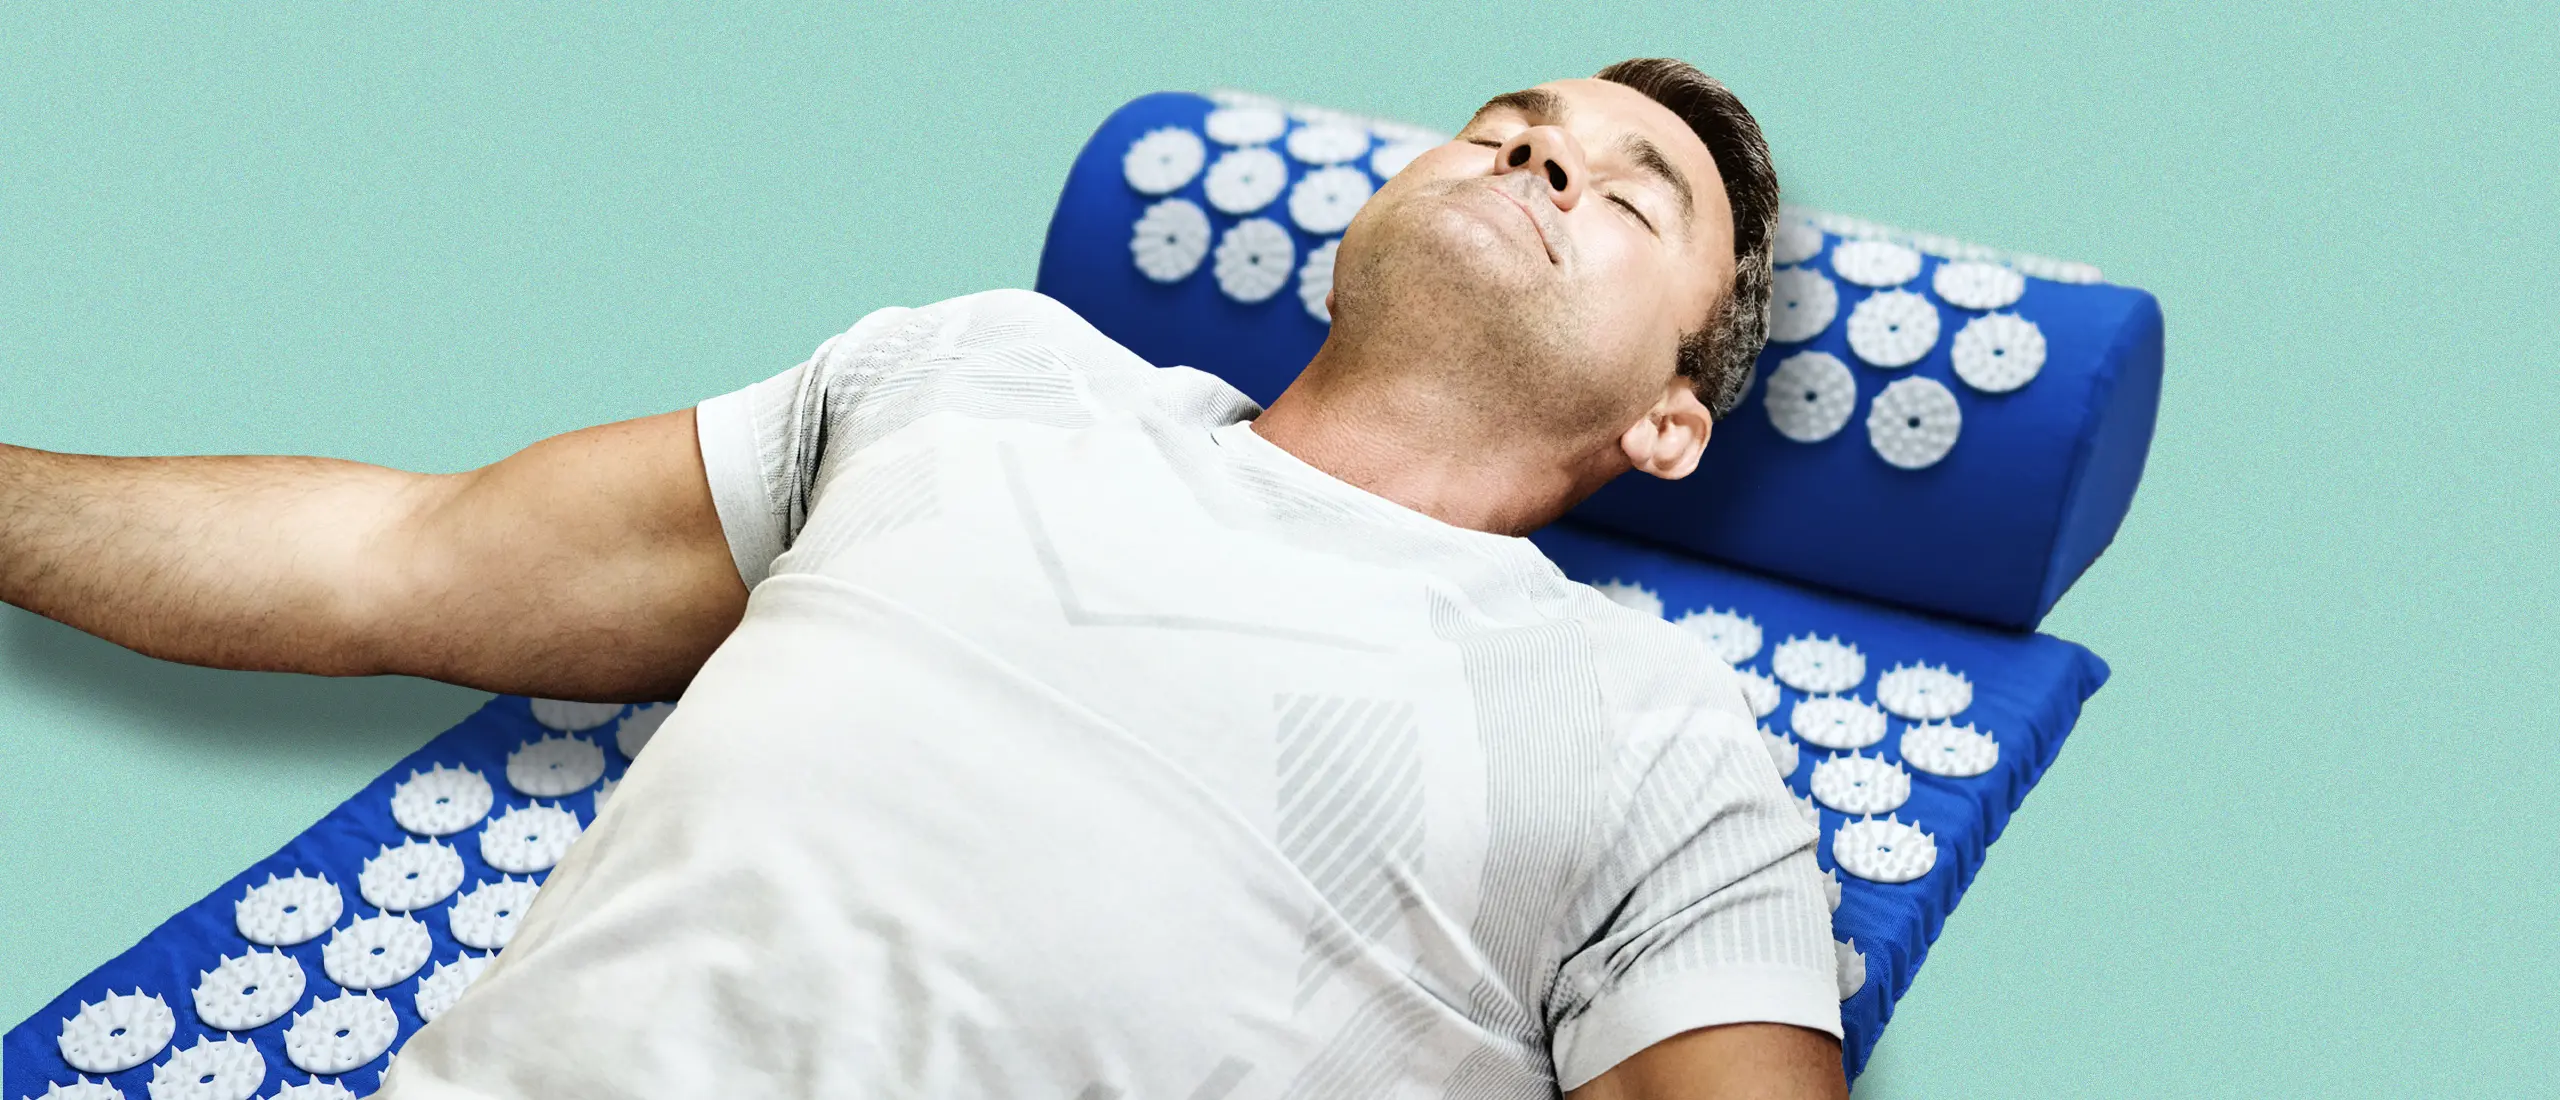 5 Potential Acupressure Mat Benefits That May Surprise You - Hone Health